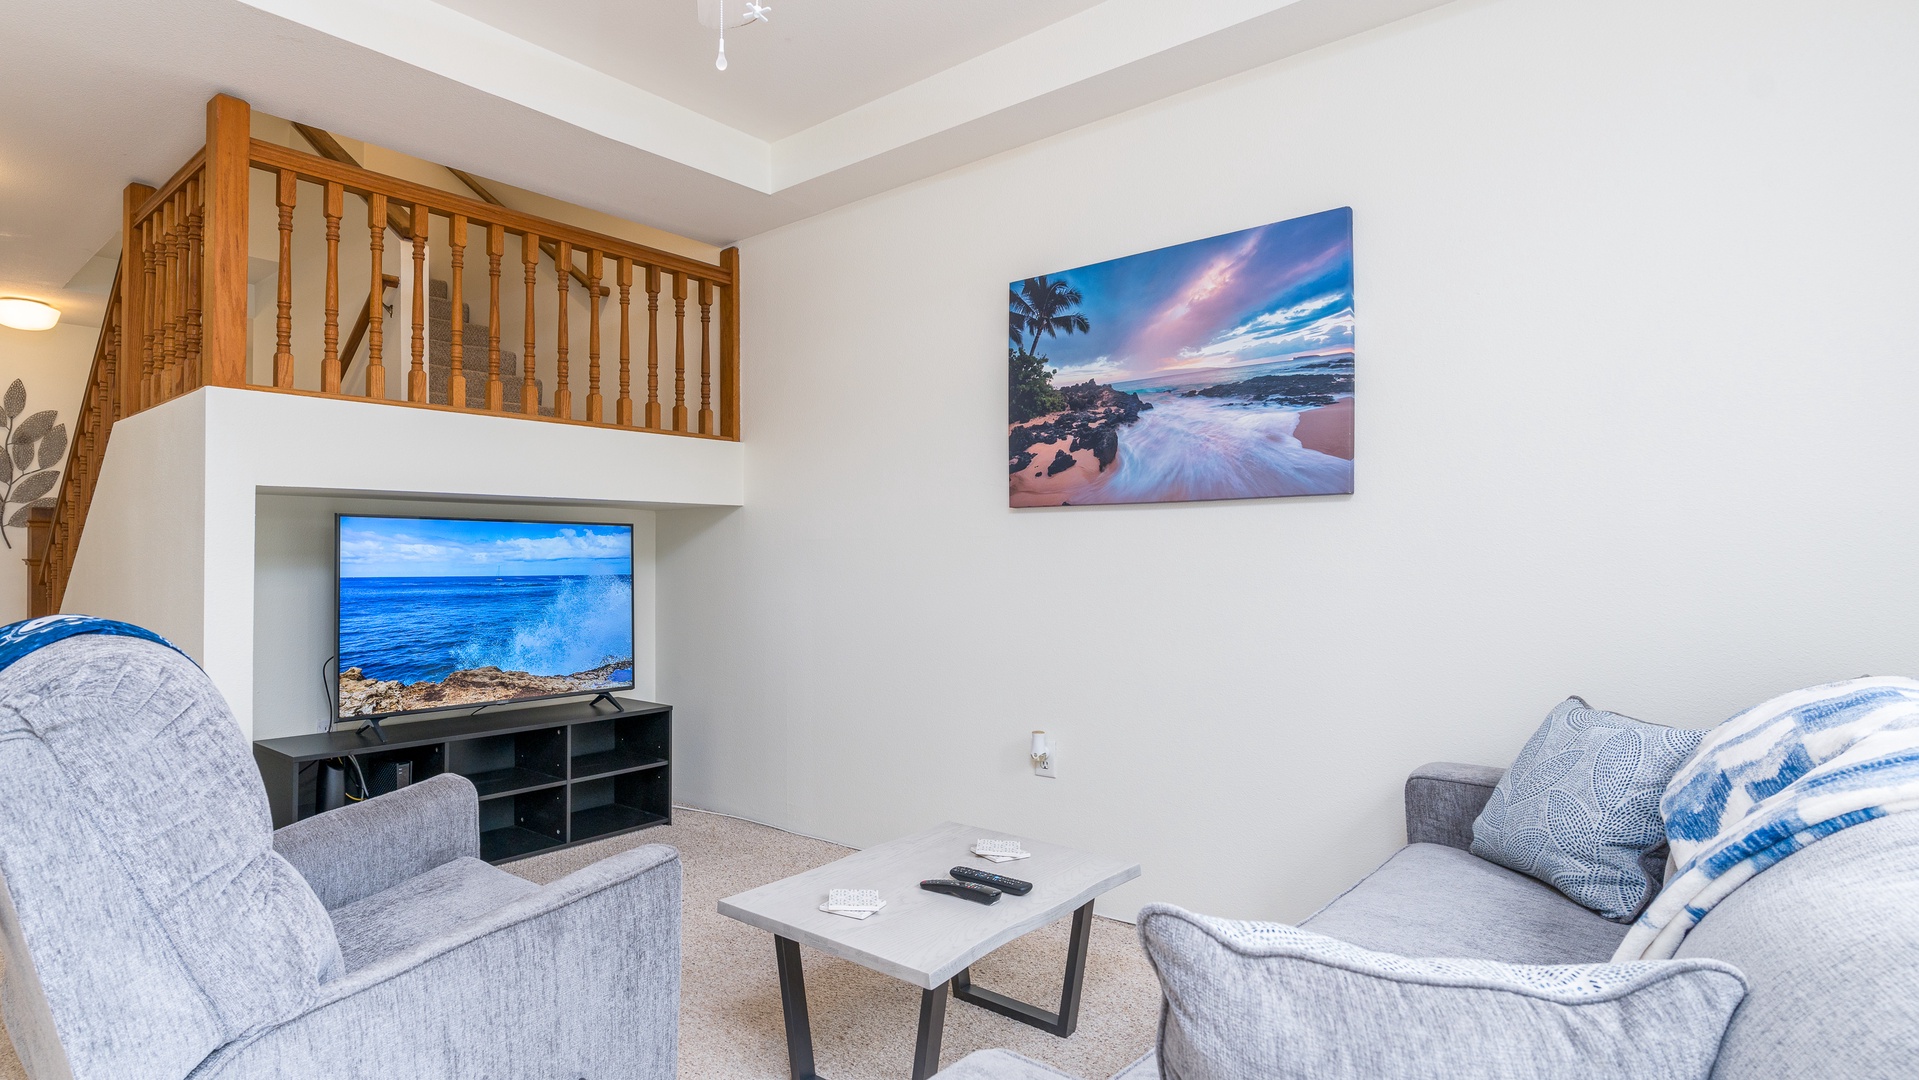 Kapolei Vacation Rentals, Fairways at Ko Olina 27H - Sink into the plush seating in the living area surrounded by natural wood tones.